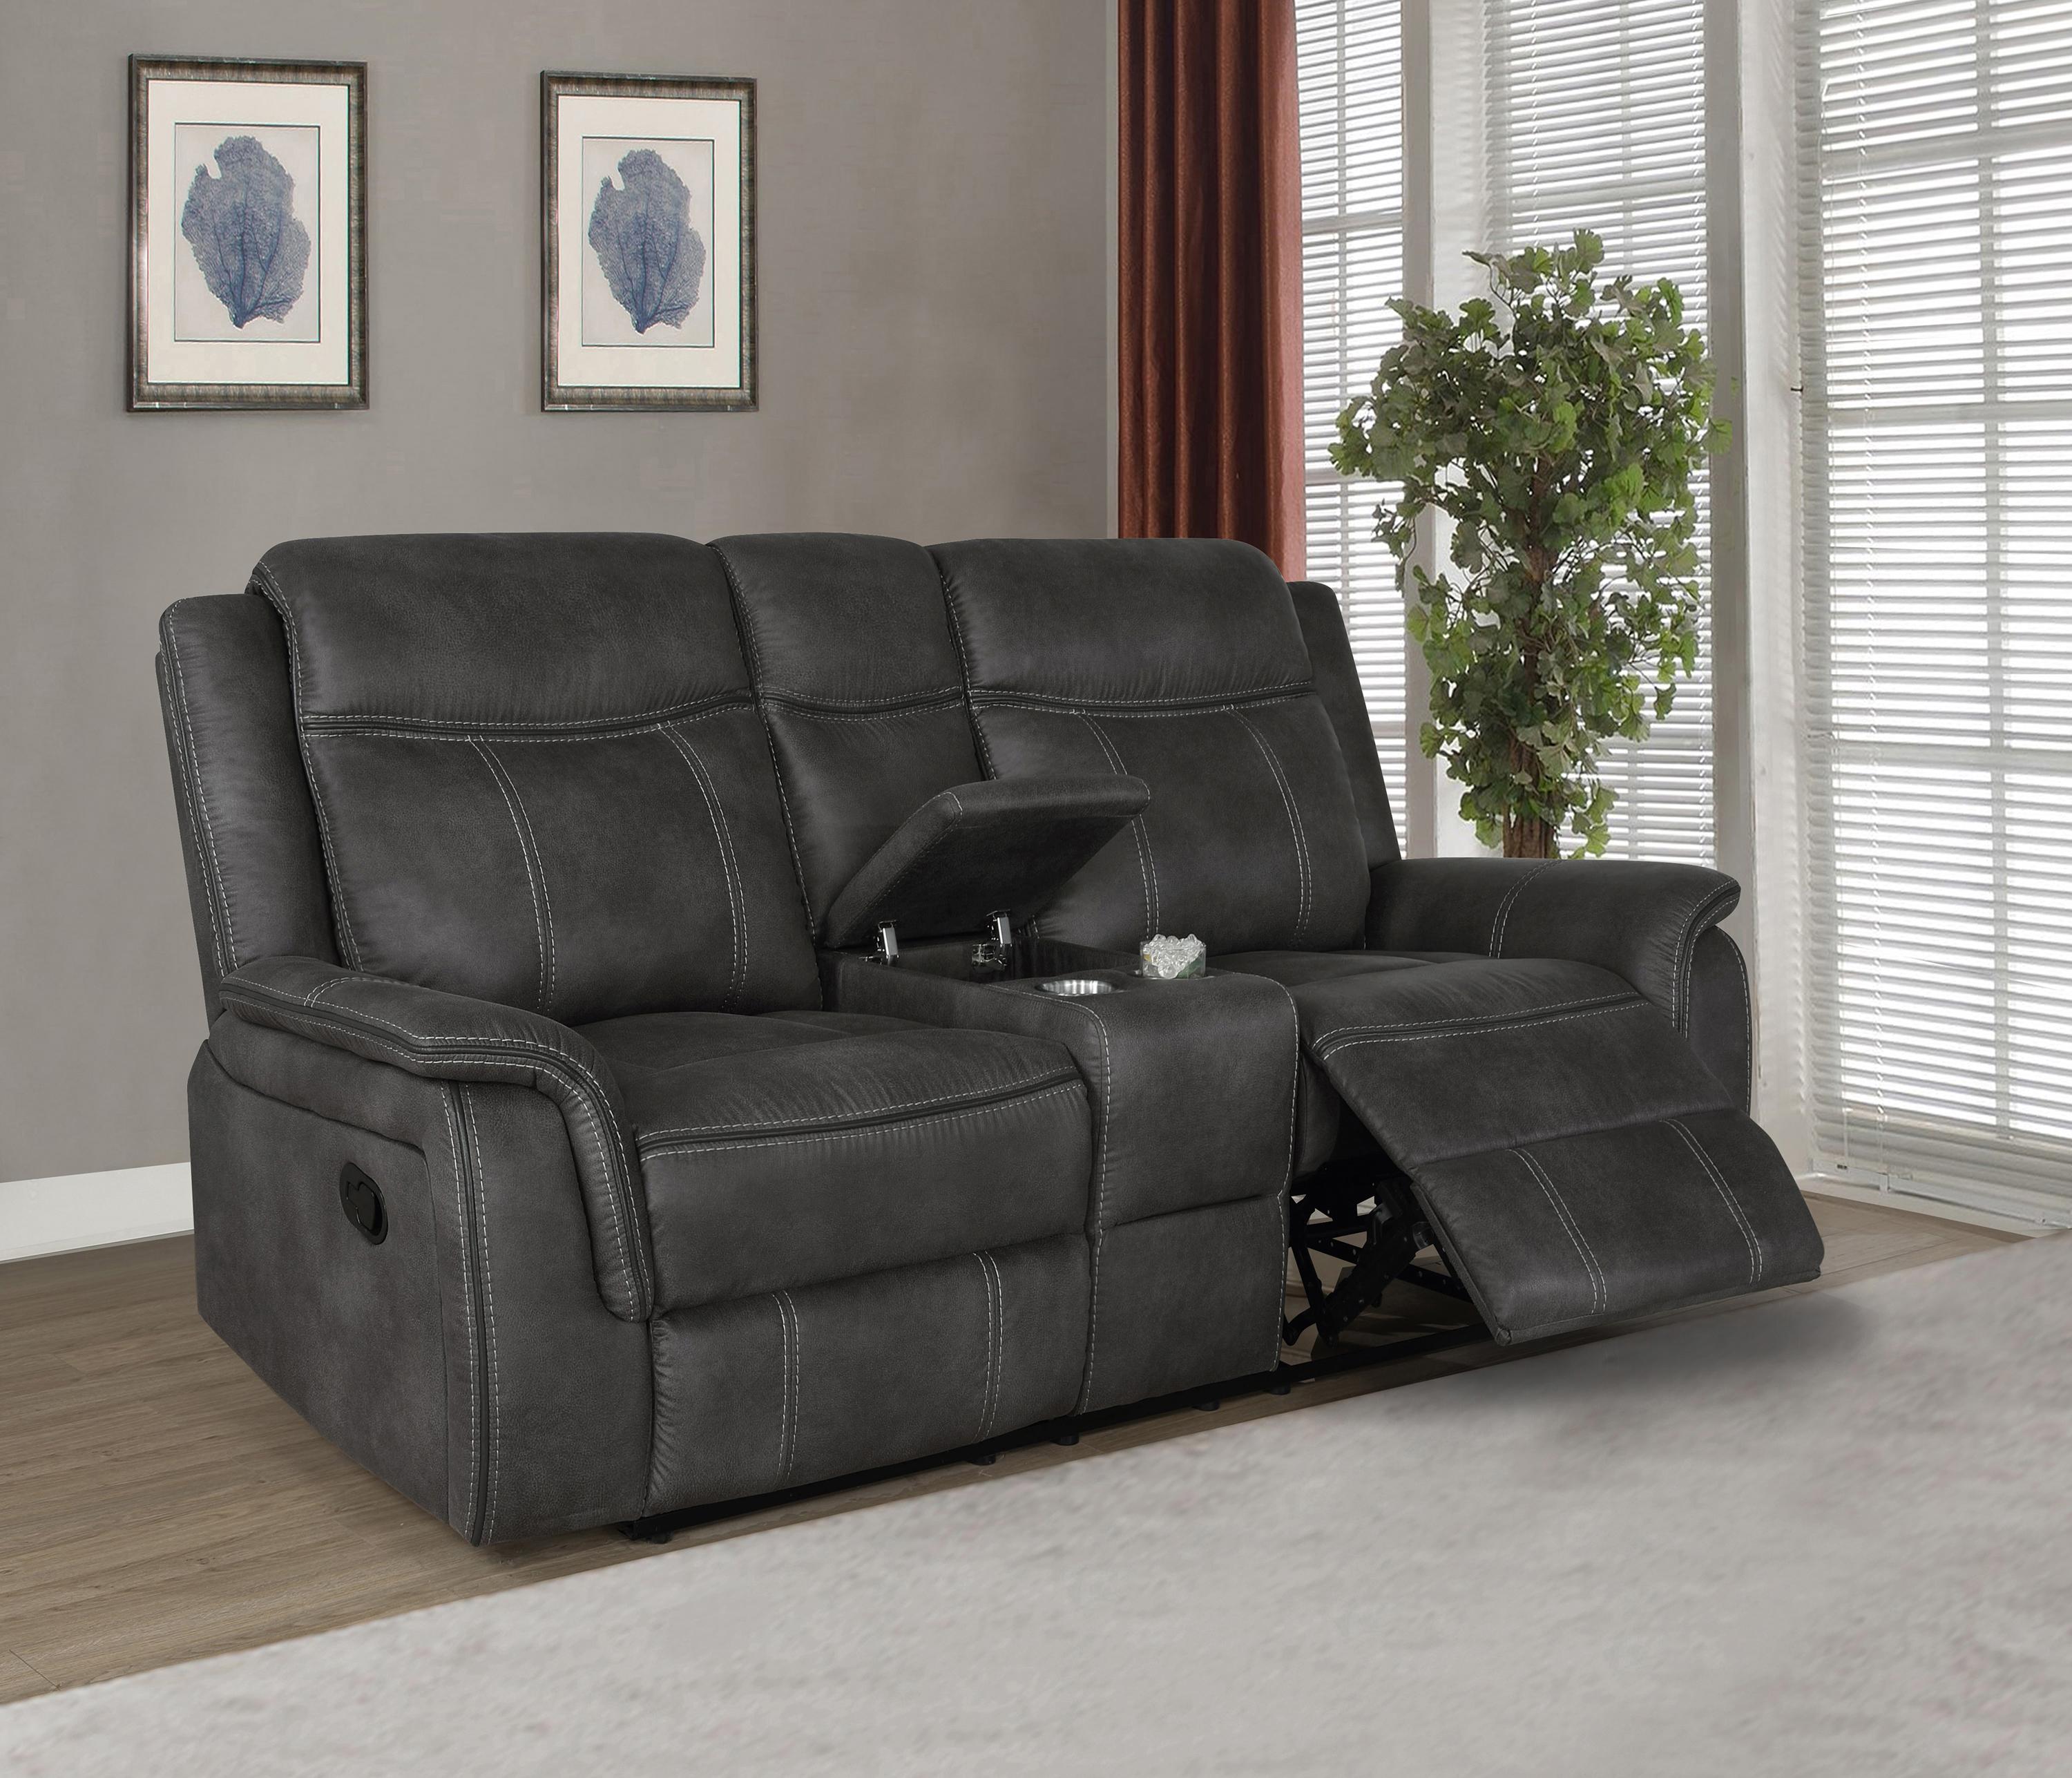 

    
603504-S3 Transitional Charcoal Coated Microfiber Living Room Set 3pcs Coaster 603504-S3 Lawrence
